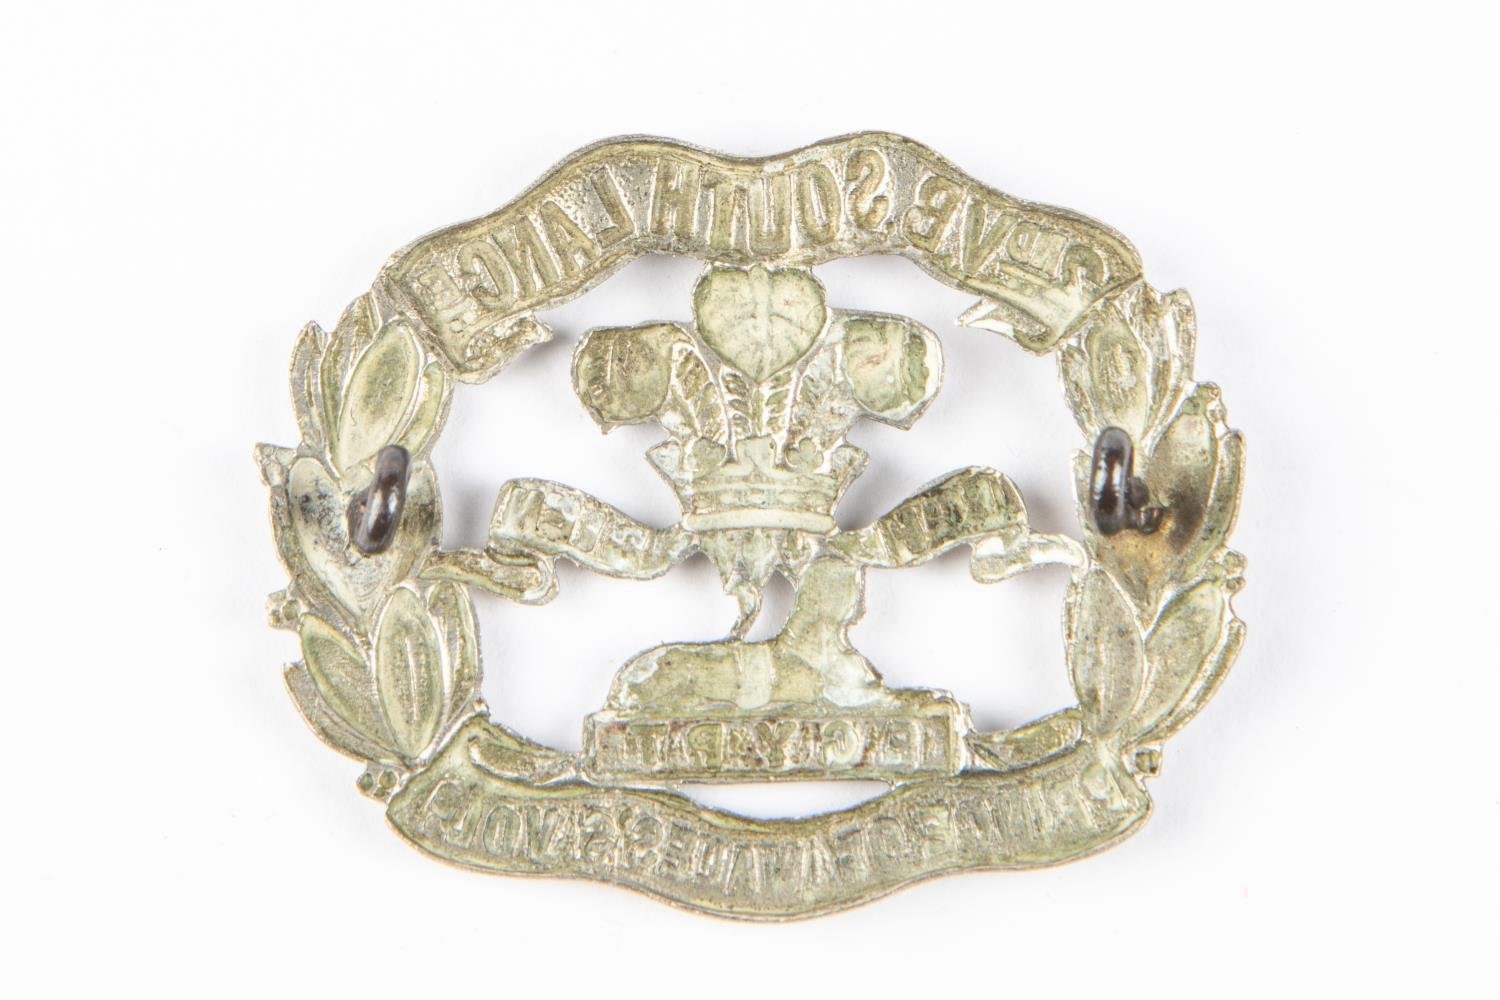 A WM cap badge of the 2nd Vol Bn South Lancashire Regt. GC £40-60 - Image 2 of 2